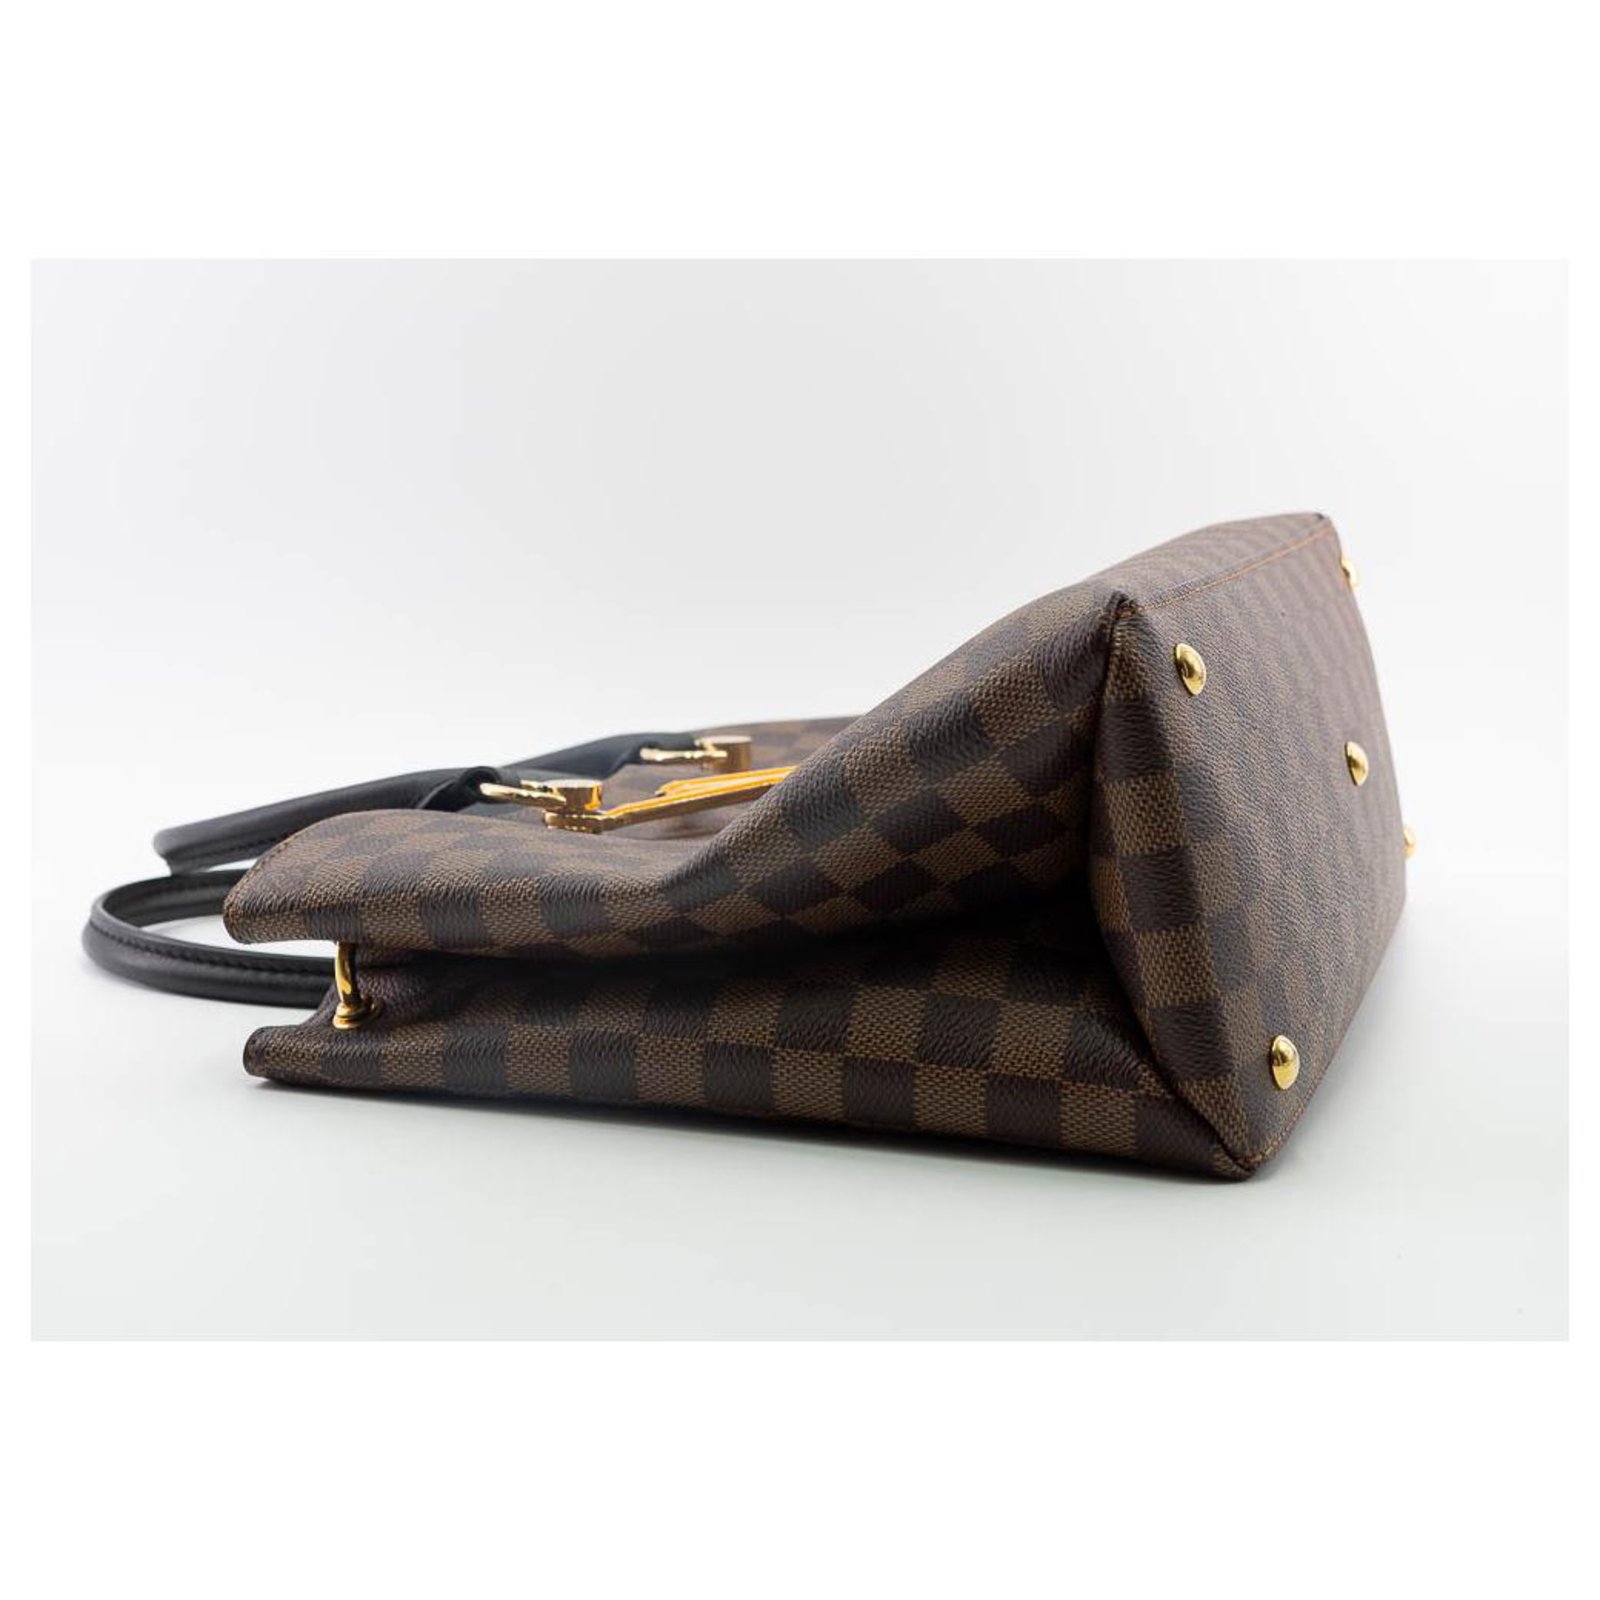 Lv riverside leather handbag Louis Vuitton Brown in Leather - 34203773